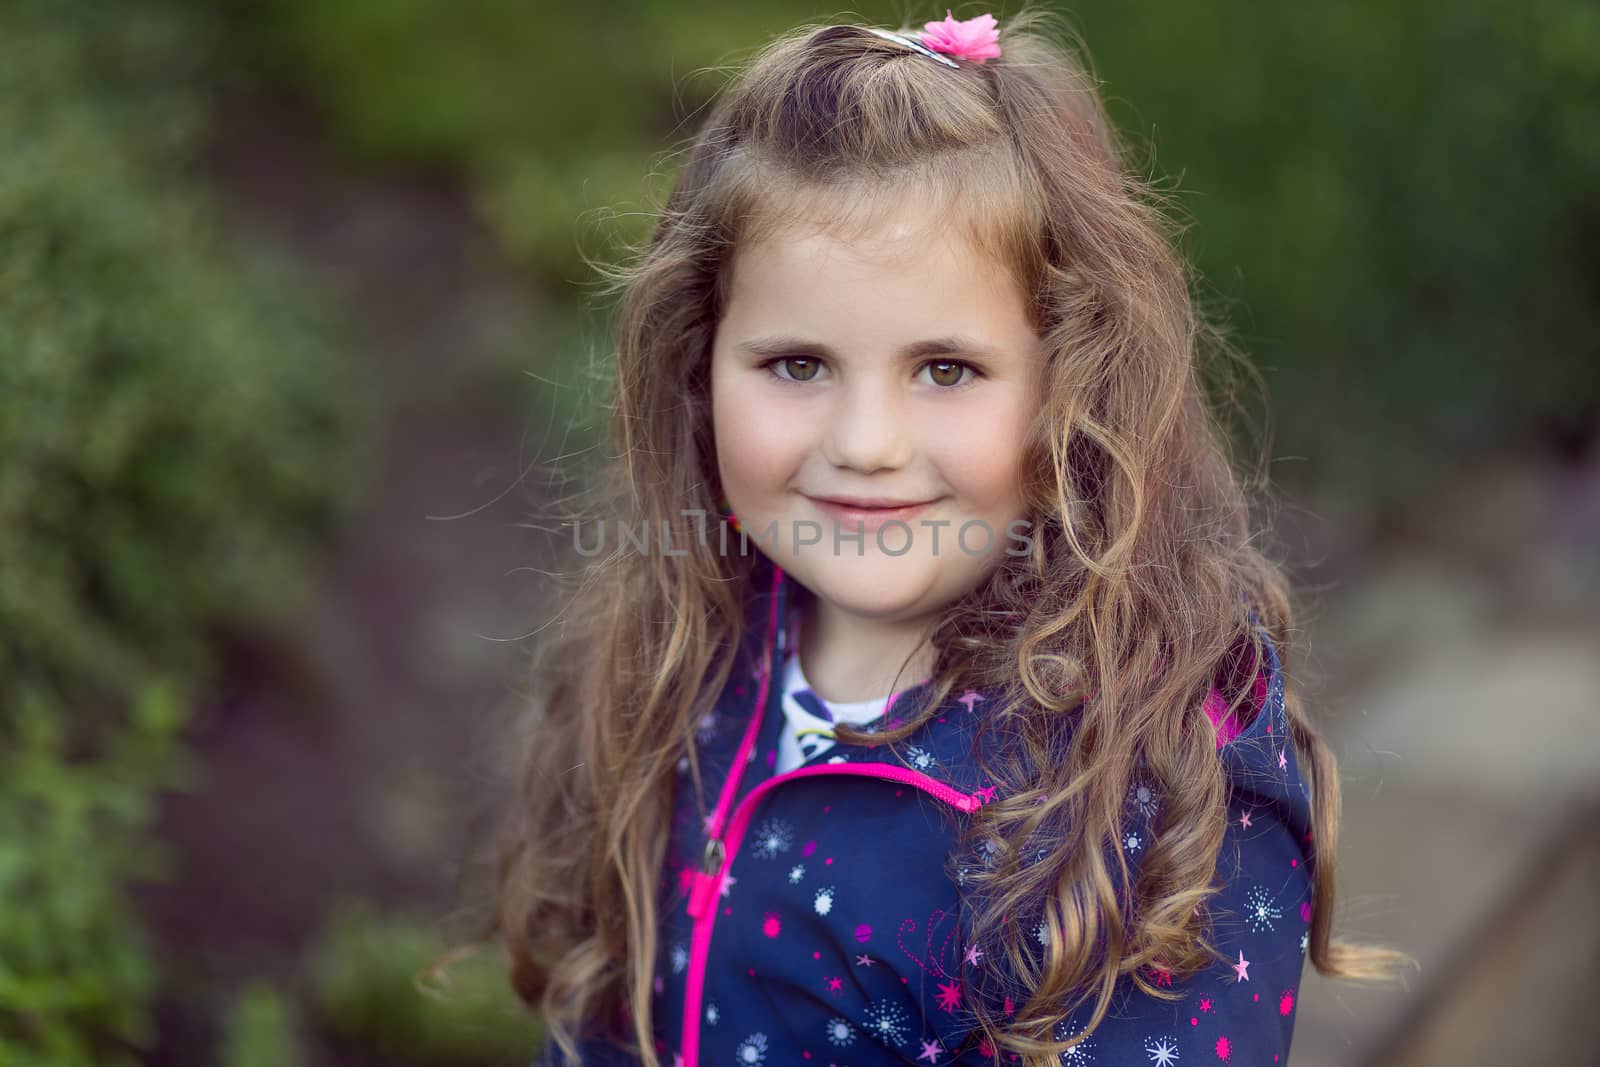 Closeup portrait of happy cute little girl with curly golden hair